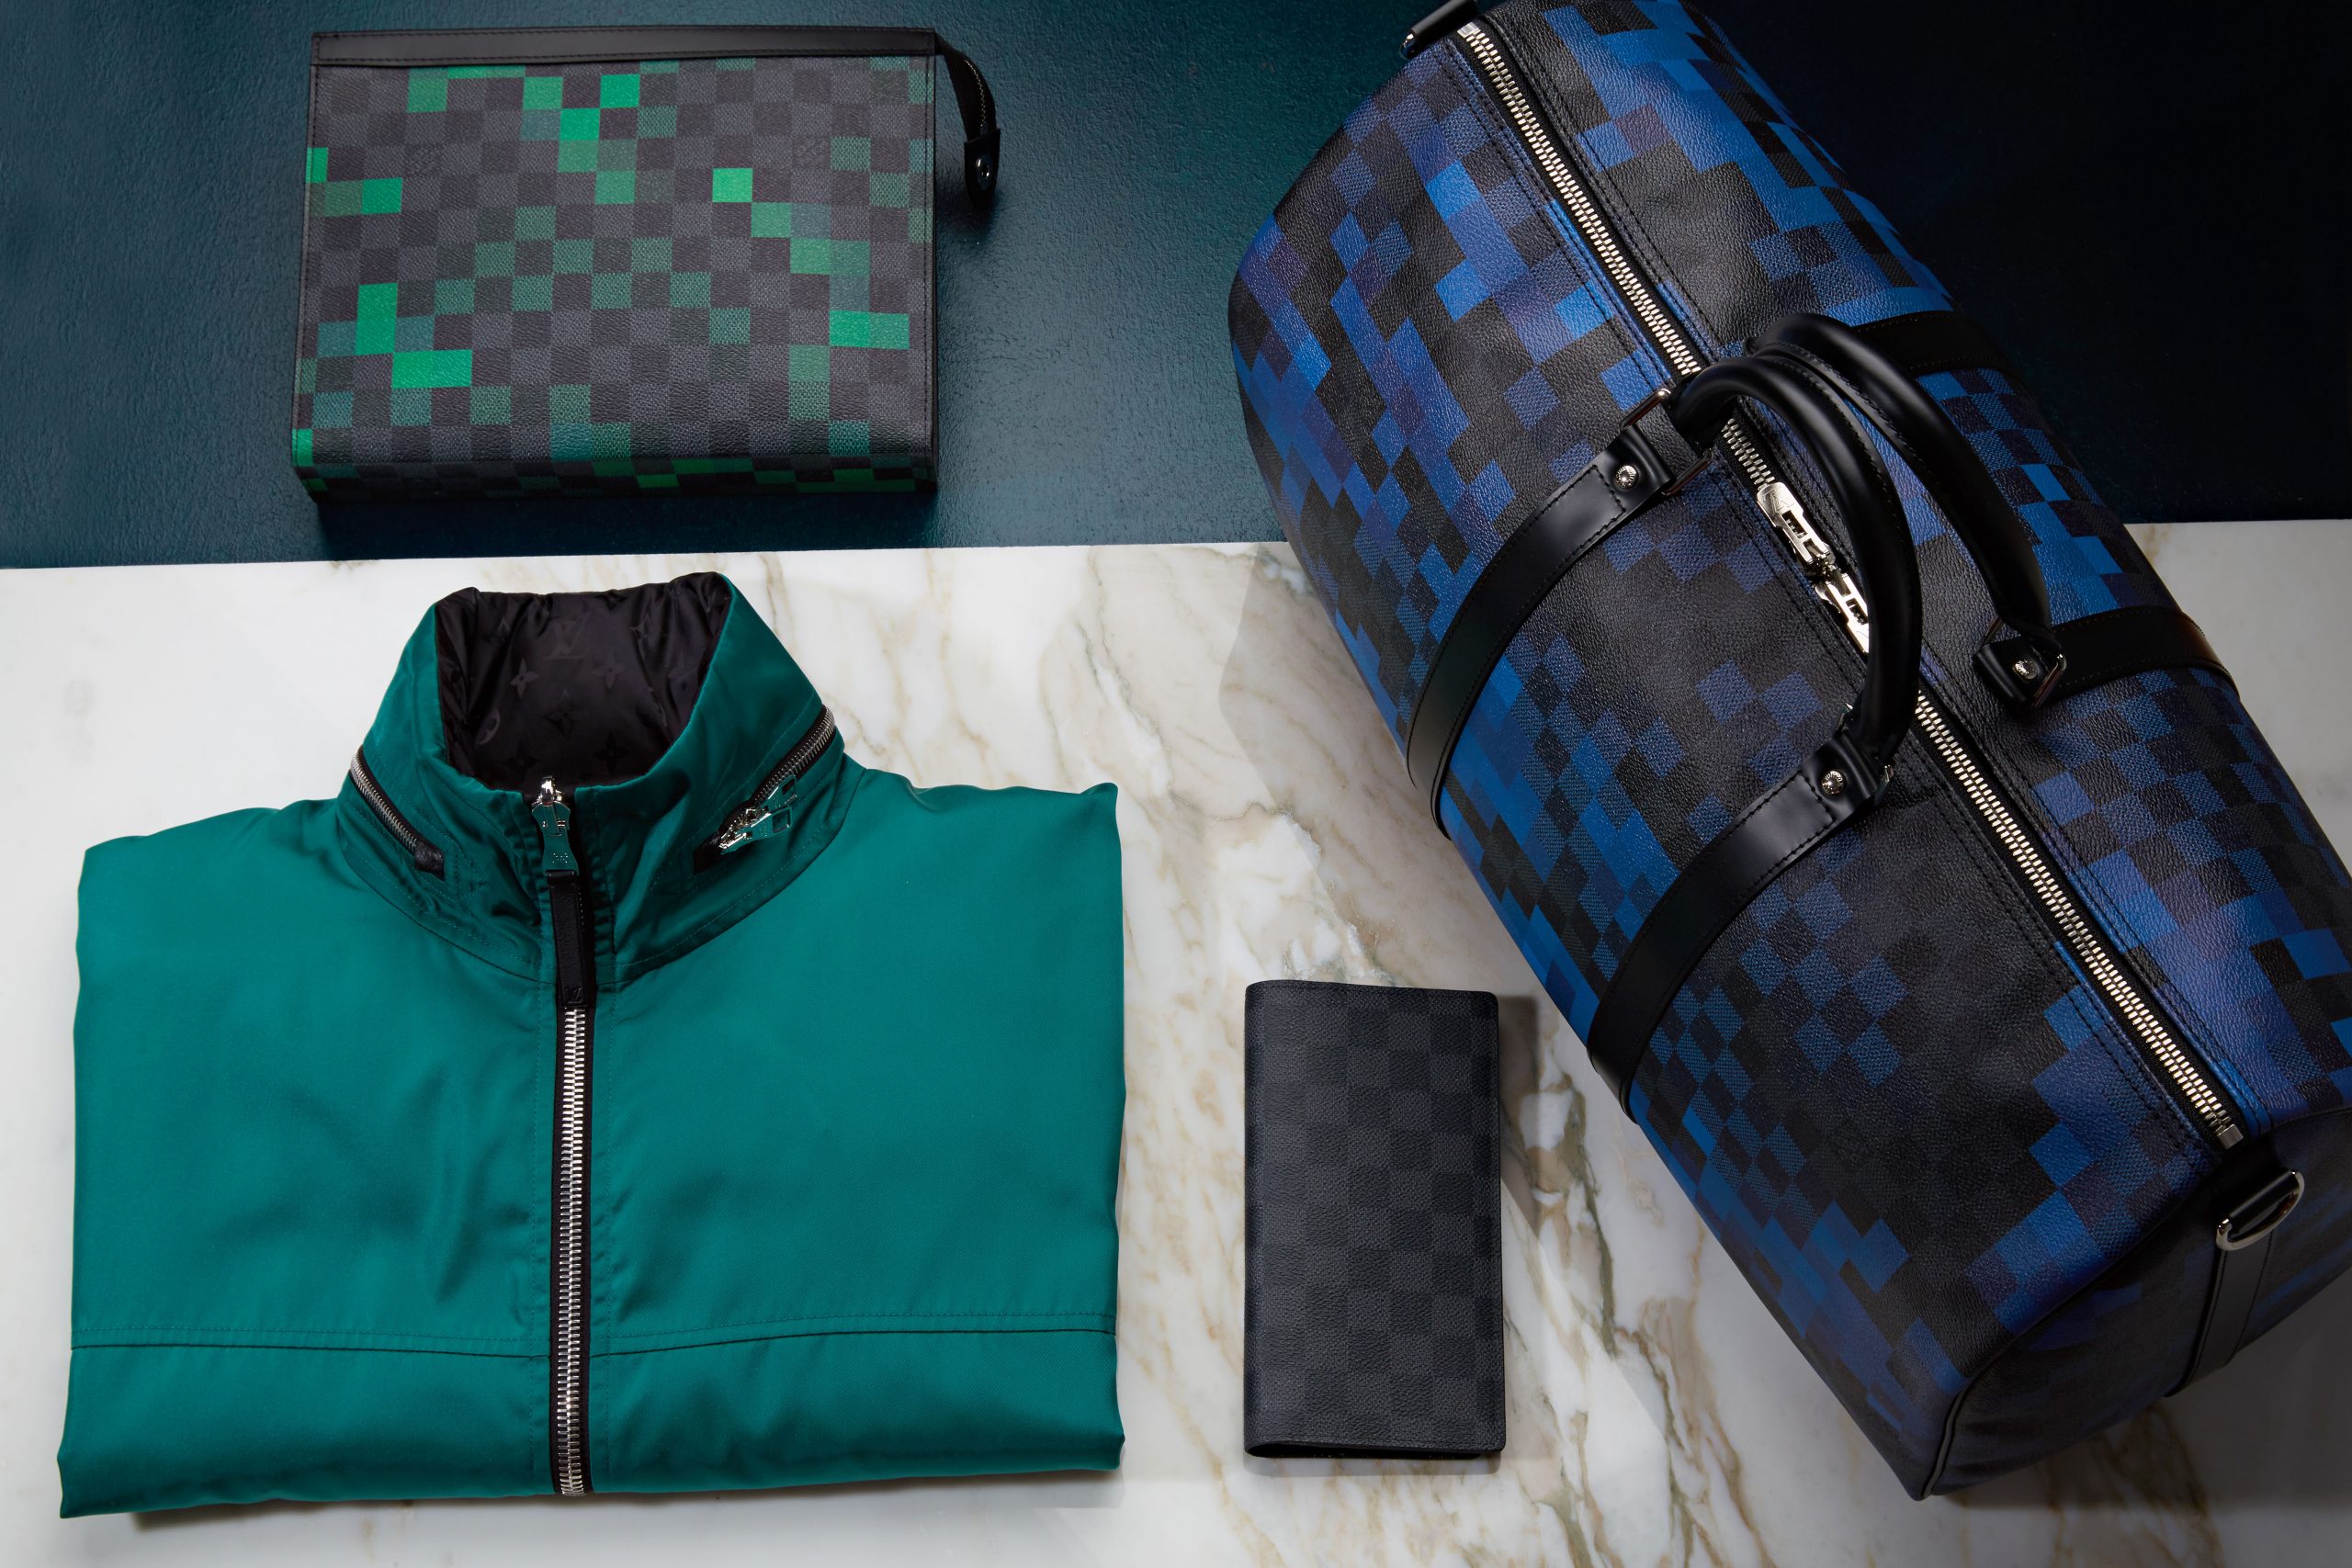 Louis Vuitton's Pixel collection is just perfect